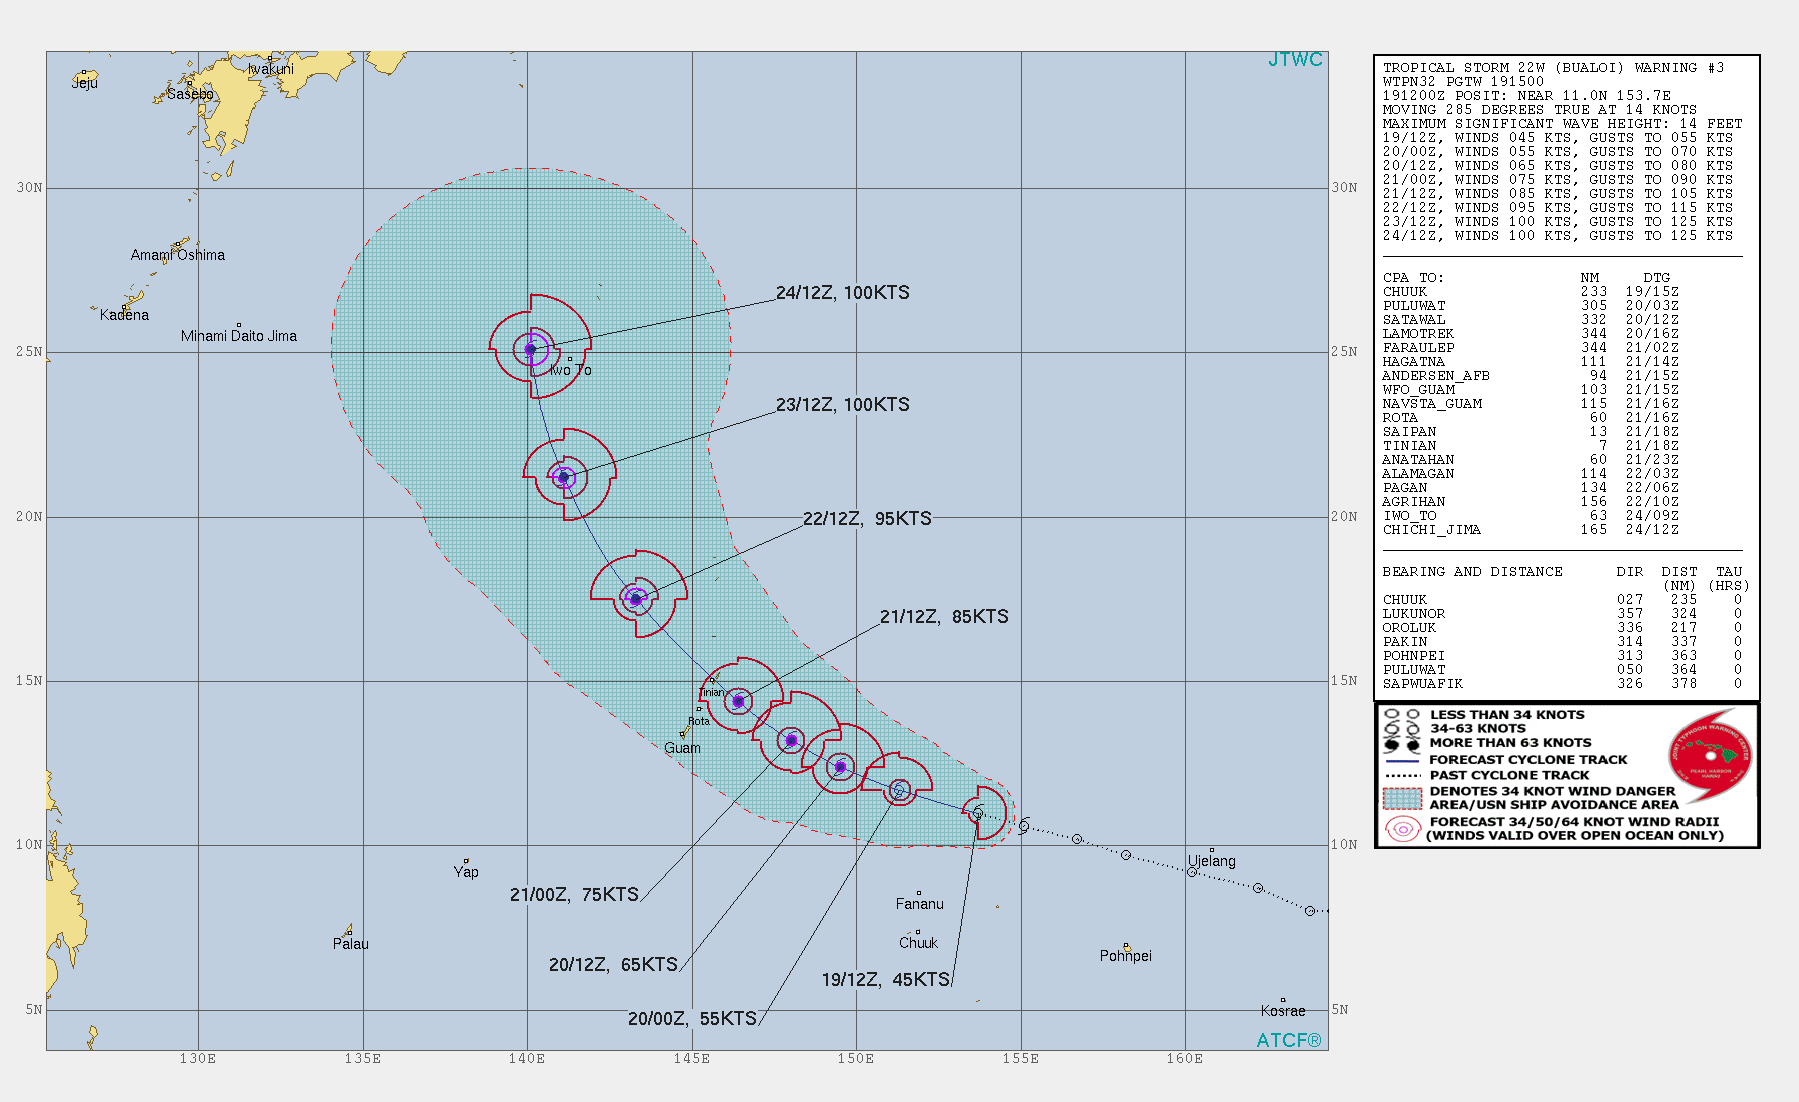 22W: FORECAST TO REACH TYPHOON INTENSITY IN APPRX 24H